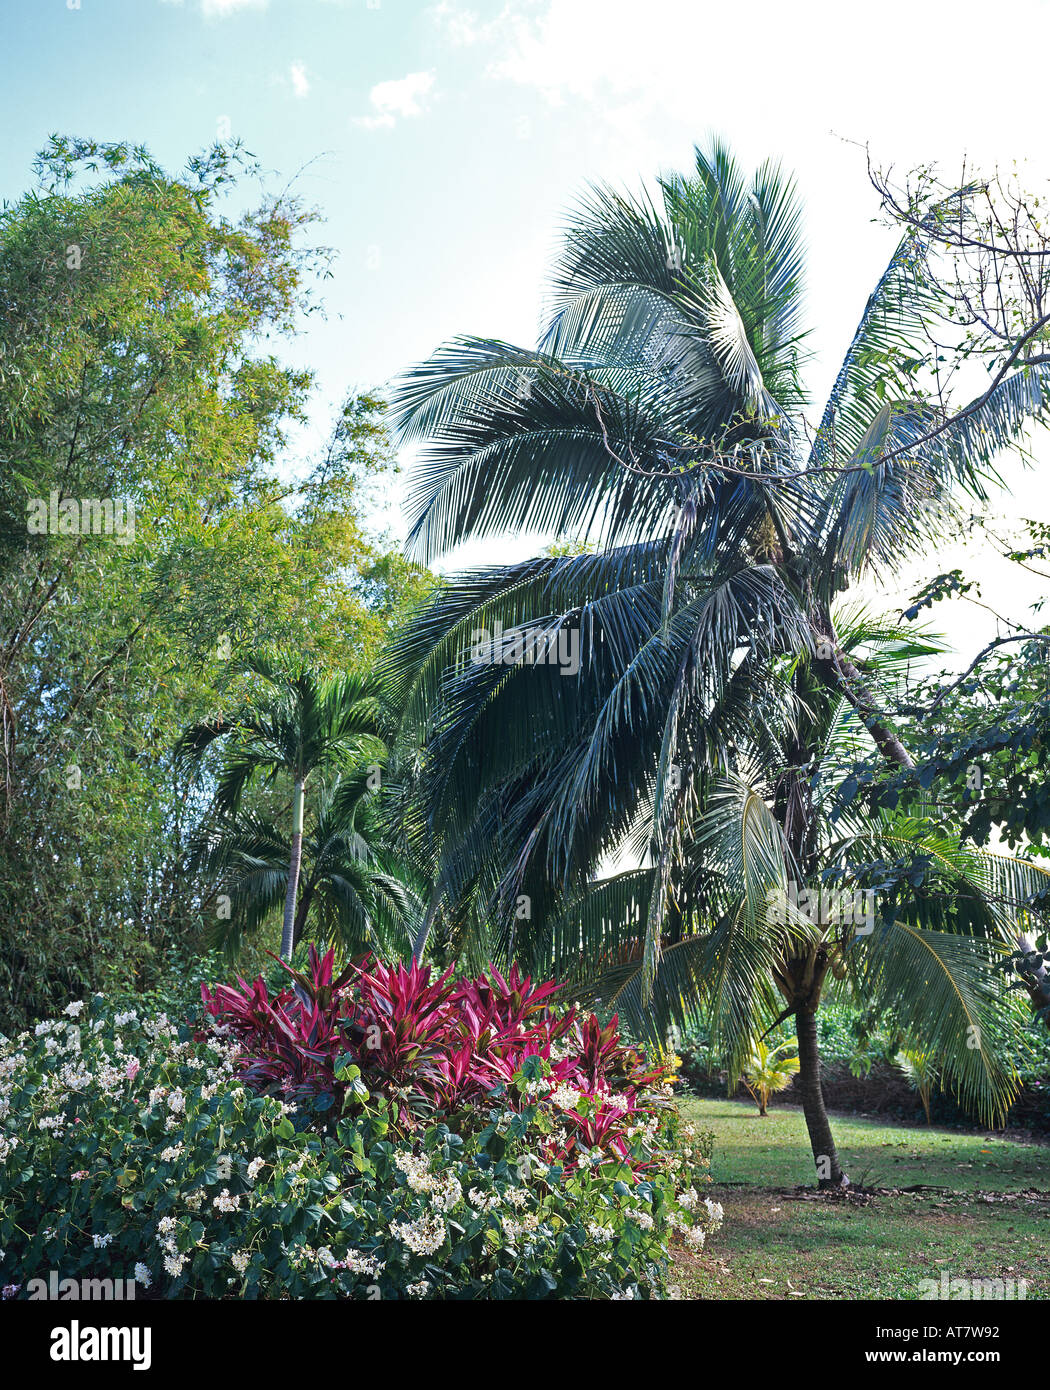 Red Cordyline plants, white begonia flowers and palm tree in tropical garden, Guadeloupe, French West Indies Stock Photo